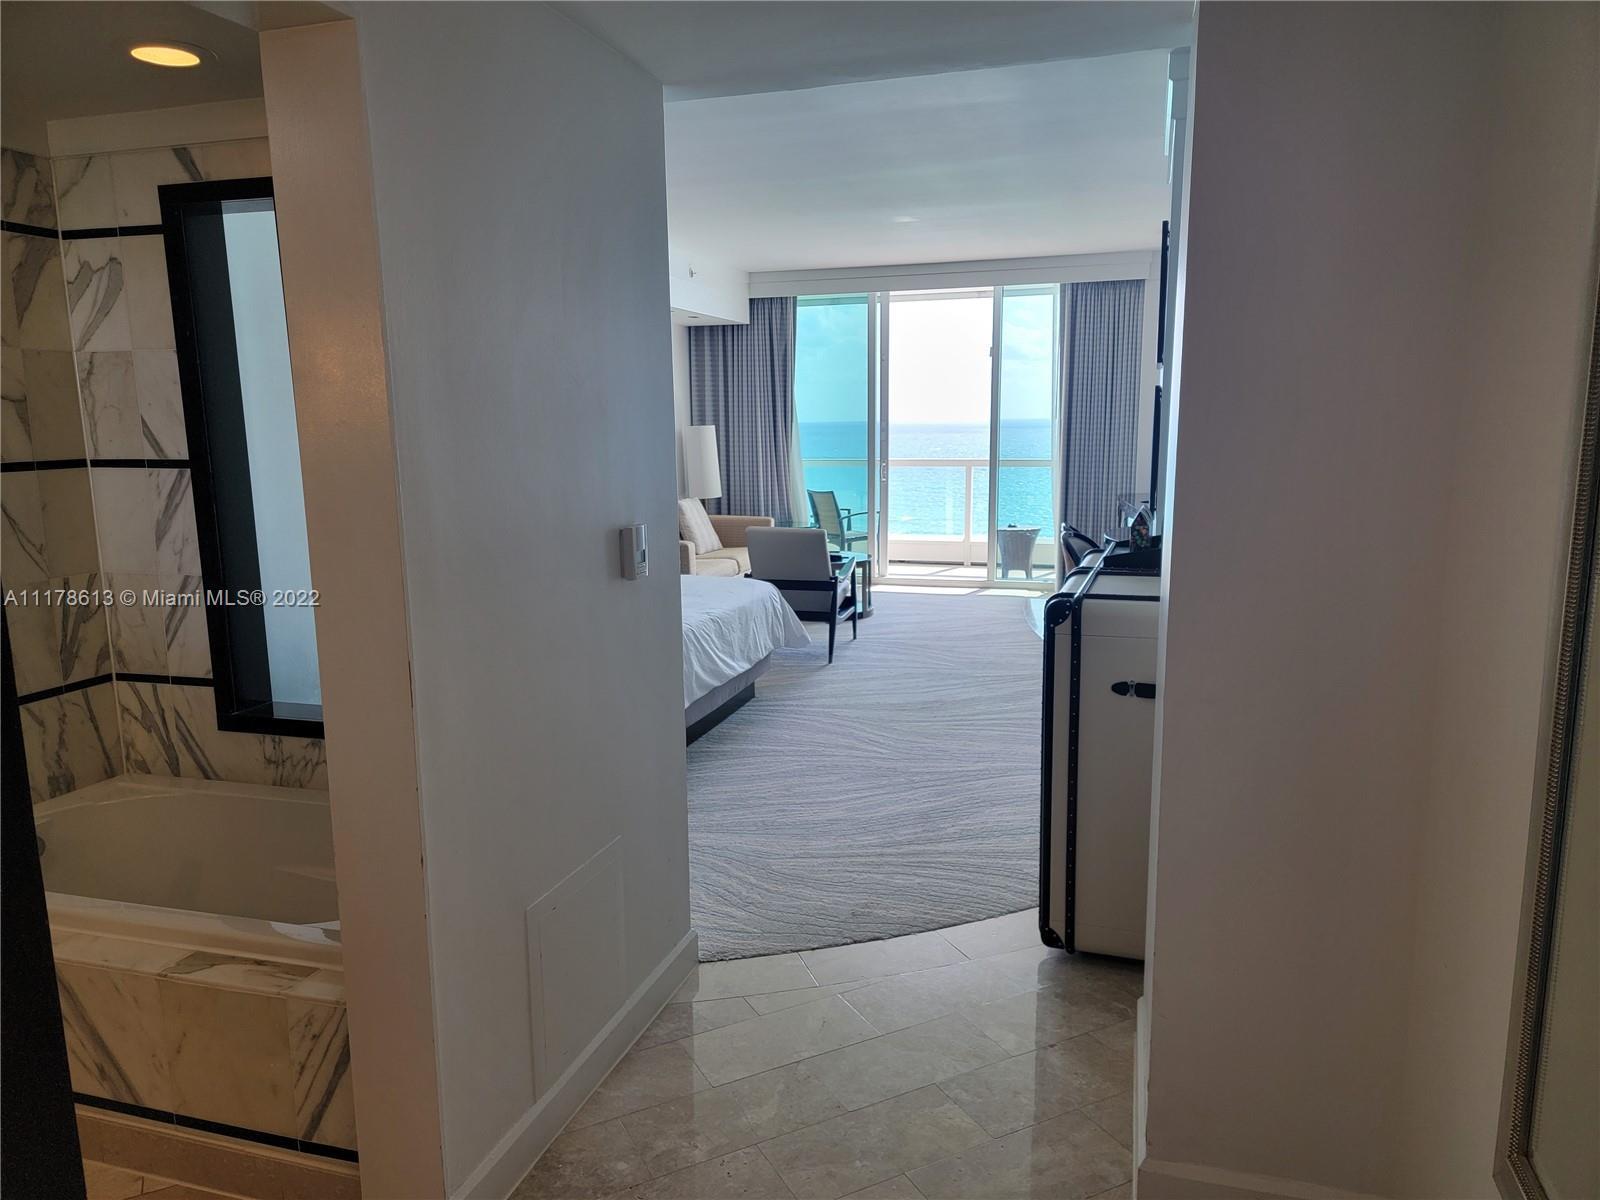 Amazing Jr Suite with stunning ocean and pool view. Completly renovated, 1 king bed and 1 sofa bed.